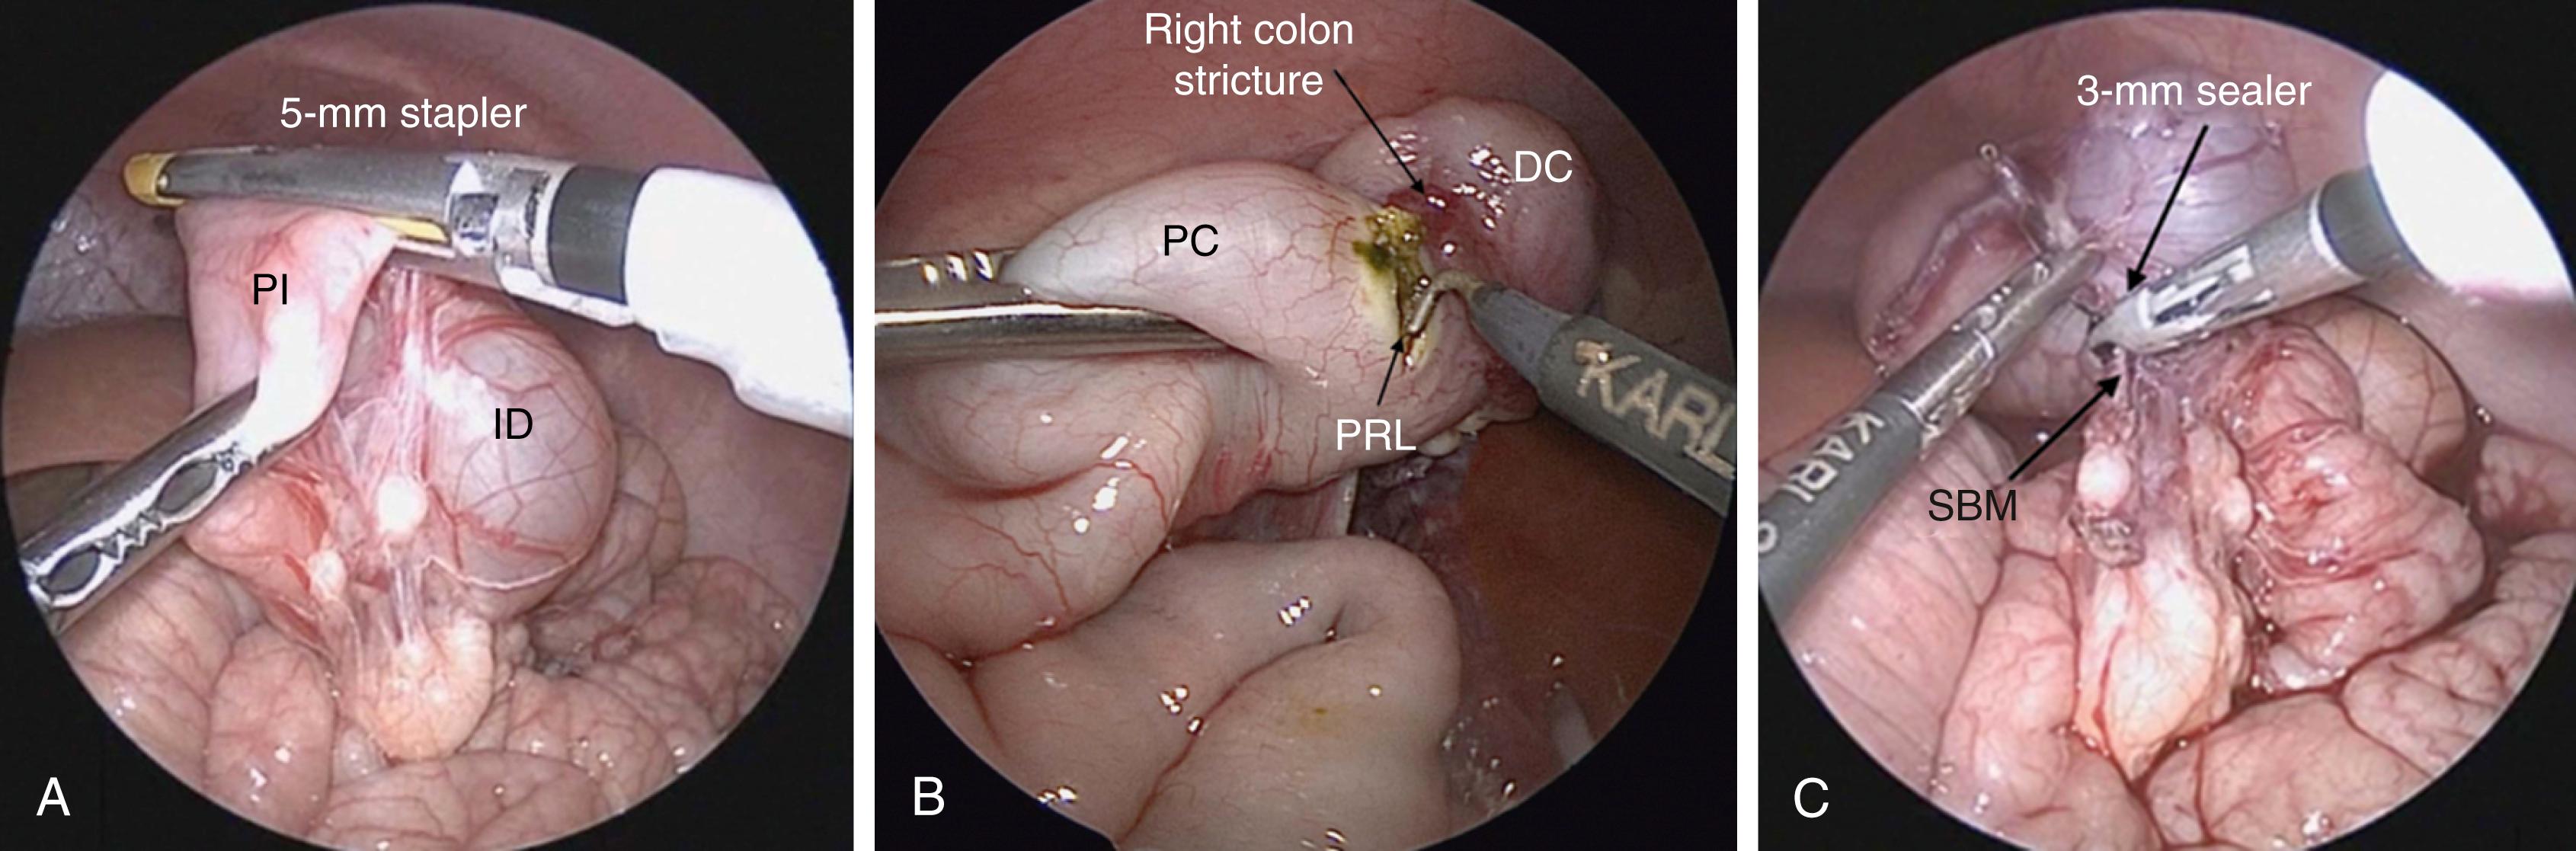 Fig. 12-4, A, An intestinal duplication (ID) in the midileum is seen. The ileum proximal (PI) to the duplication is being divided with the 5-mm stapler. B, A necrotizing enterocolitis (NEC) stricture in the distal right colon is seen. A hook cautery is used to divide the right colon proximal (PRL) to the stricture. A similar division is made distal to the stricture on the distal colon (DC). C, A 3-mm vessel sealer is being used to strip off the small bowel mesentery (SBM) of an intestinal duplication.